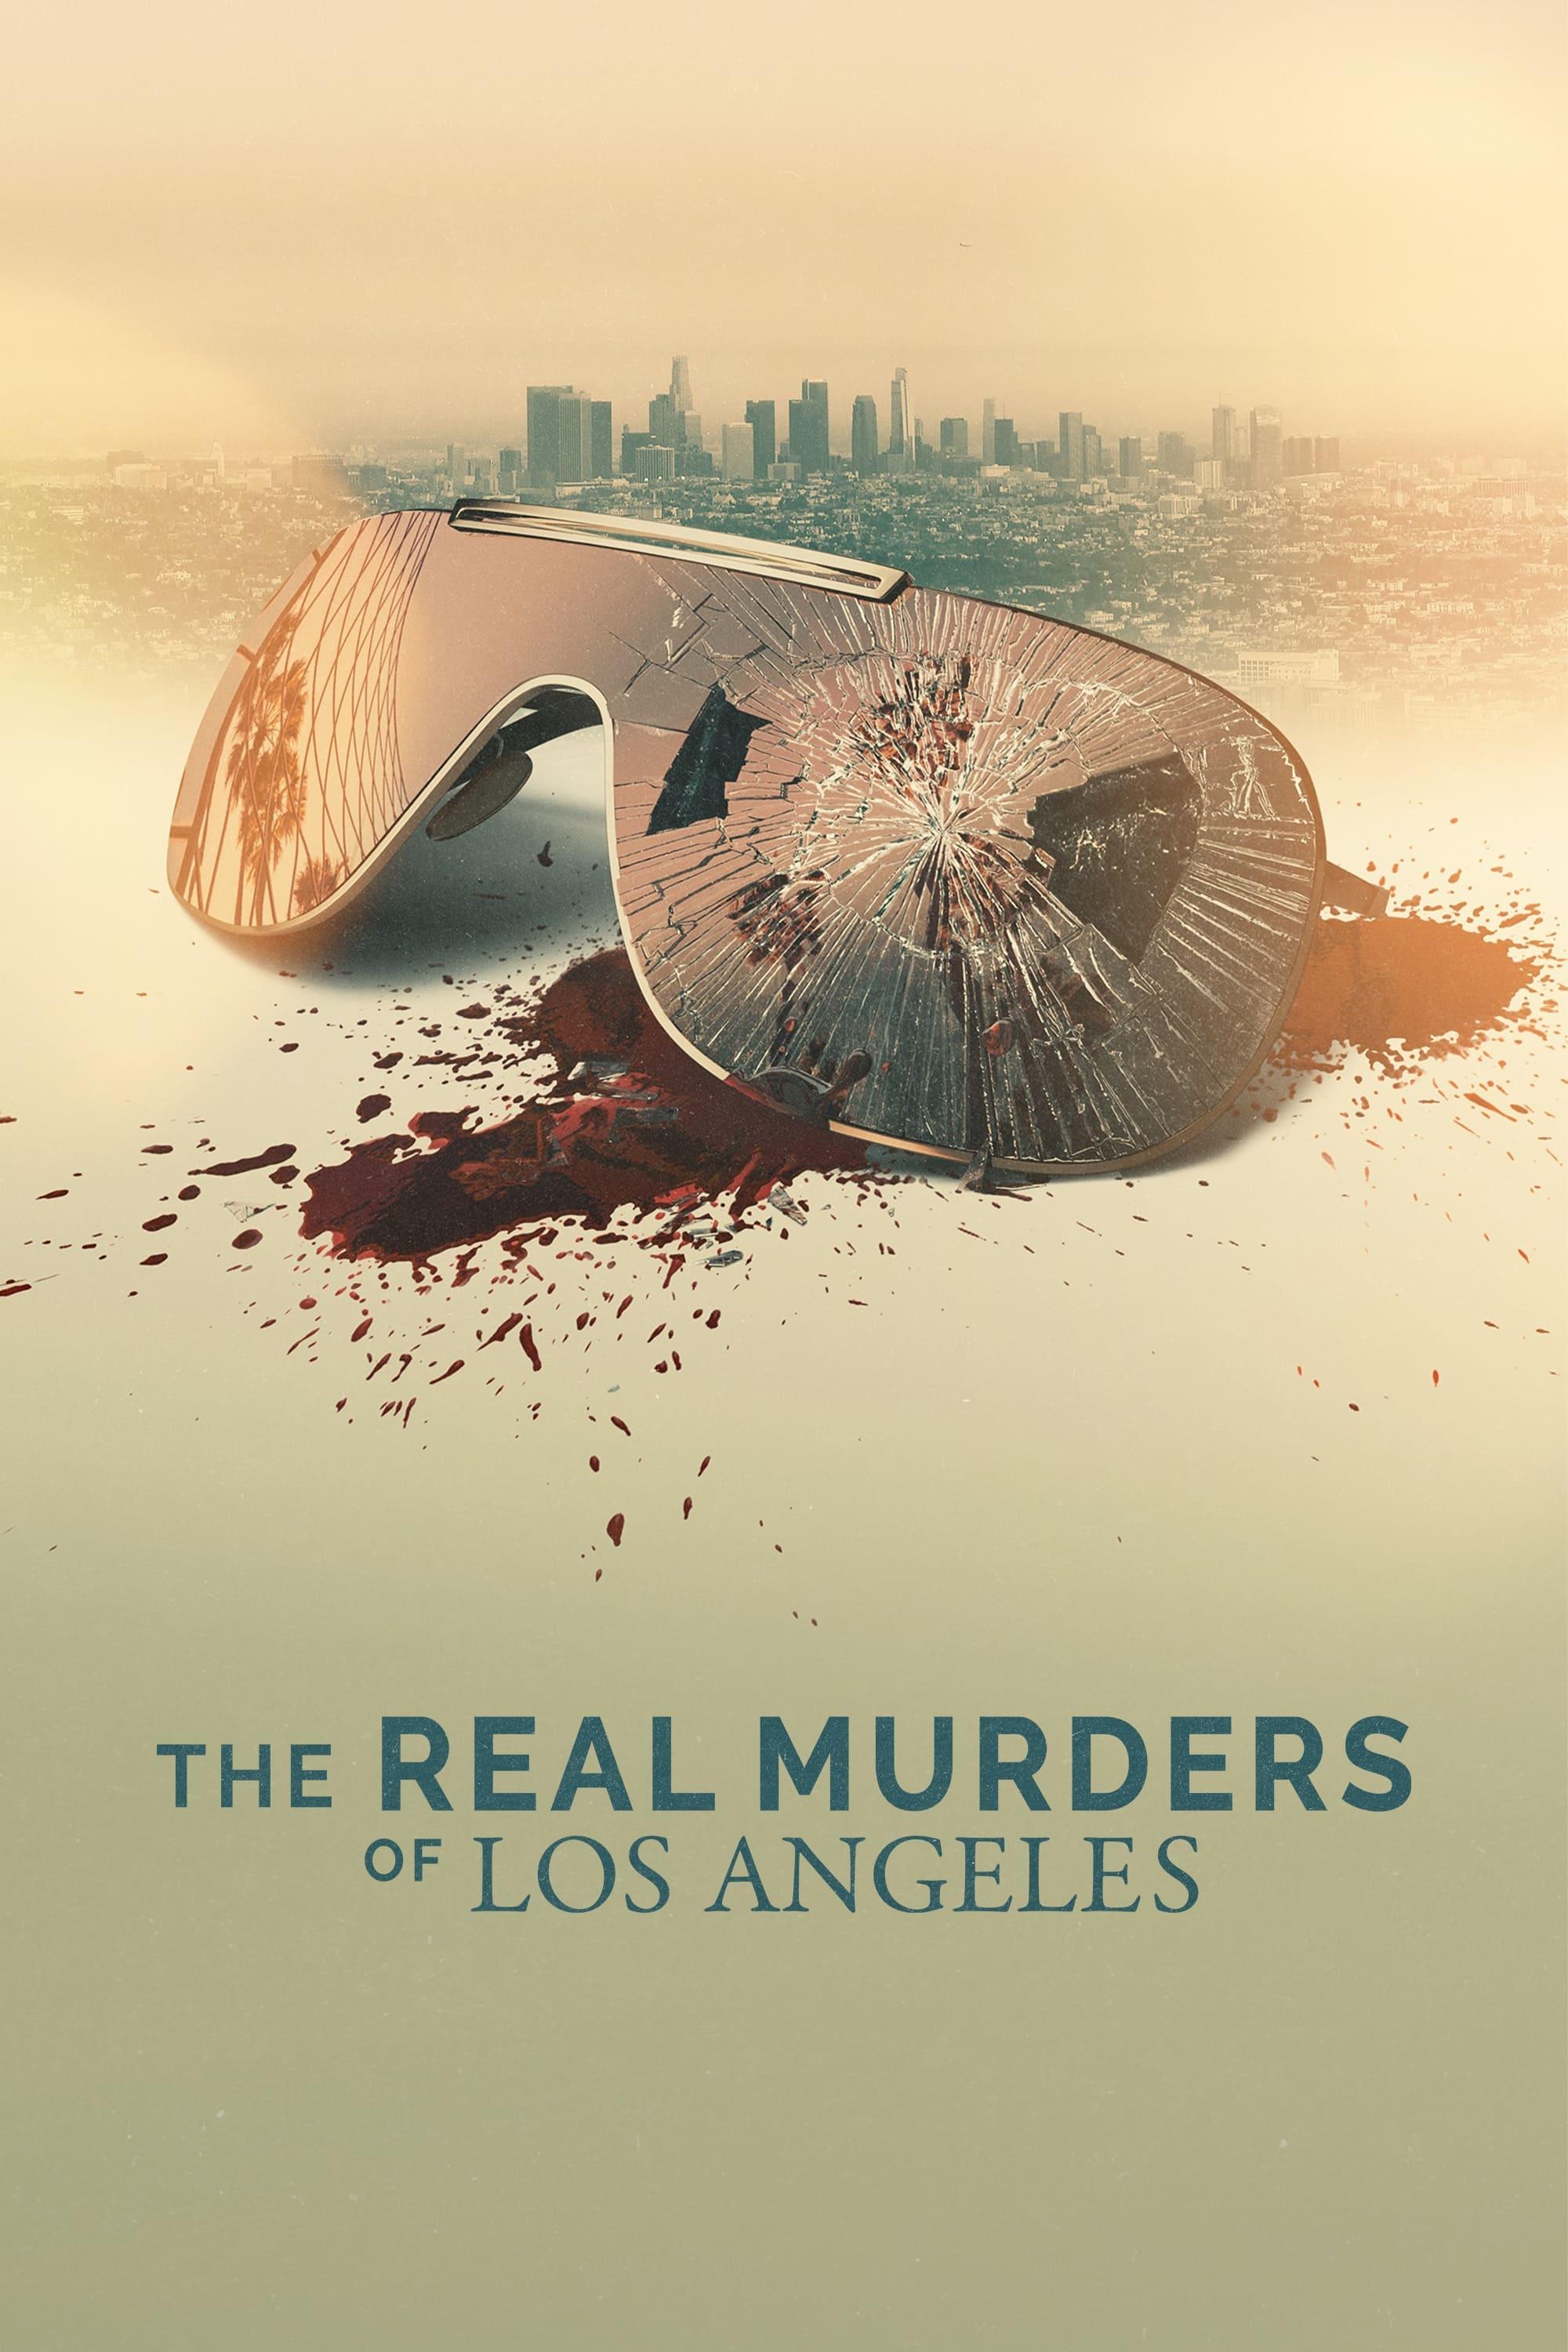 The Real Murders of Los Angeles poster